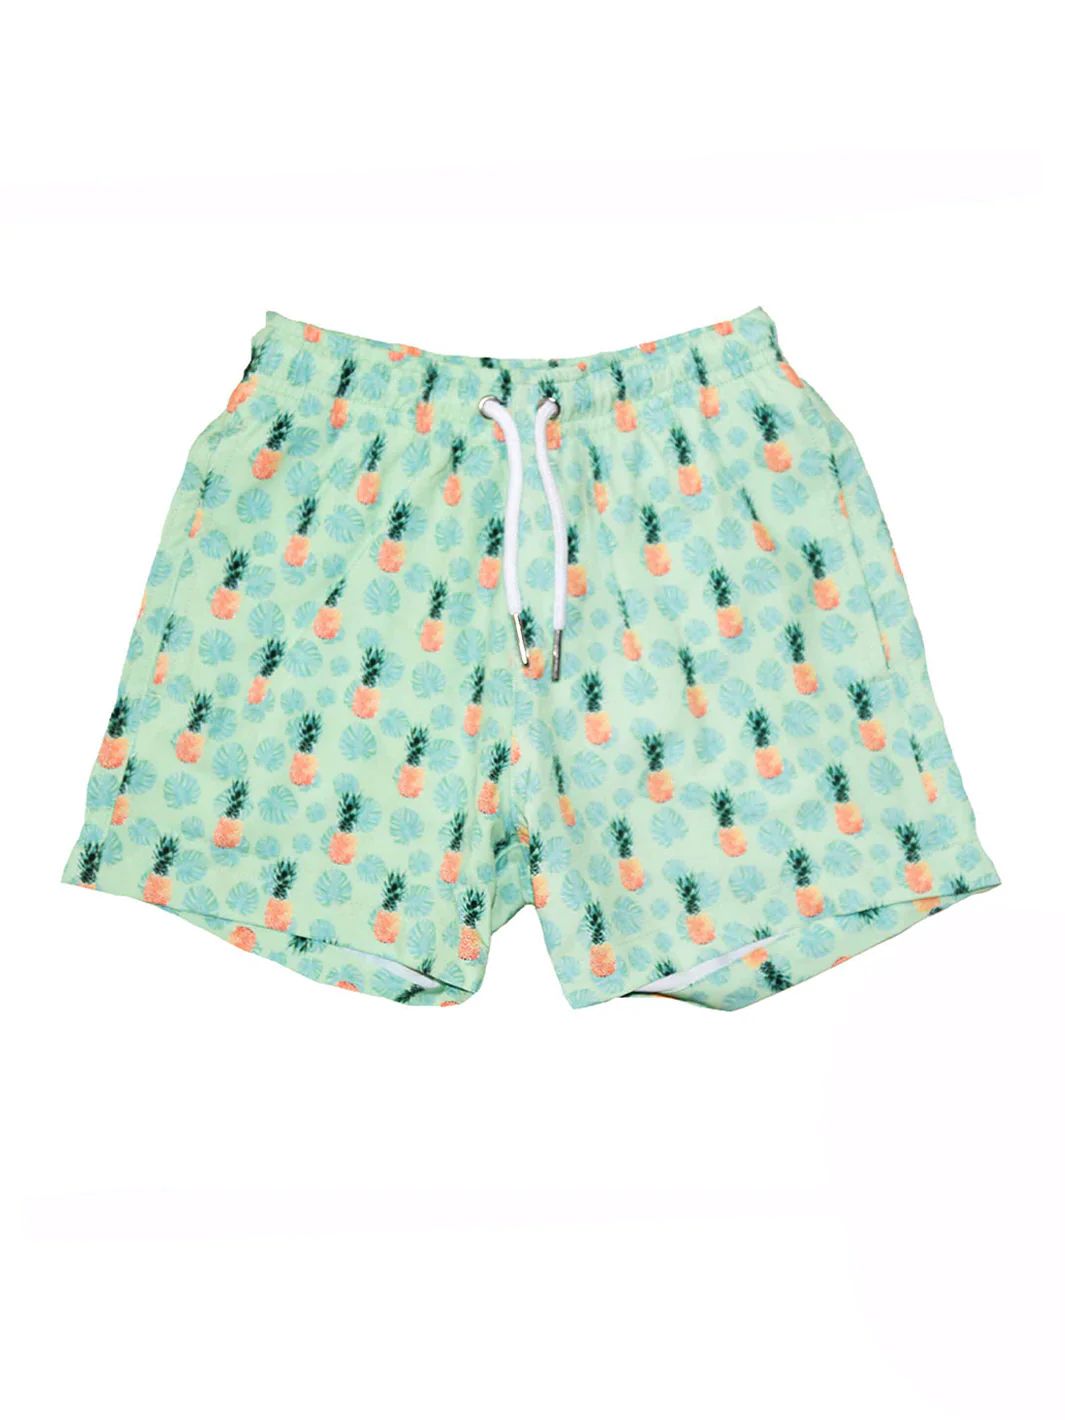 Bermies Men's Kids' Pineapple Vibes Swim Trunks in Green 4 Lord & Taylor | Lord & Taylor